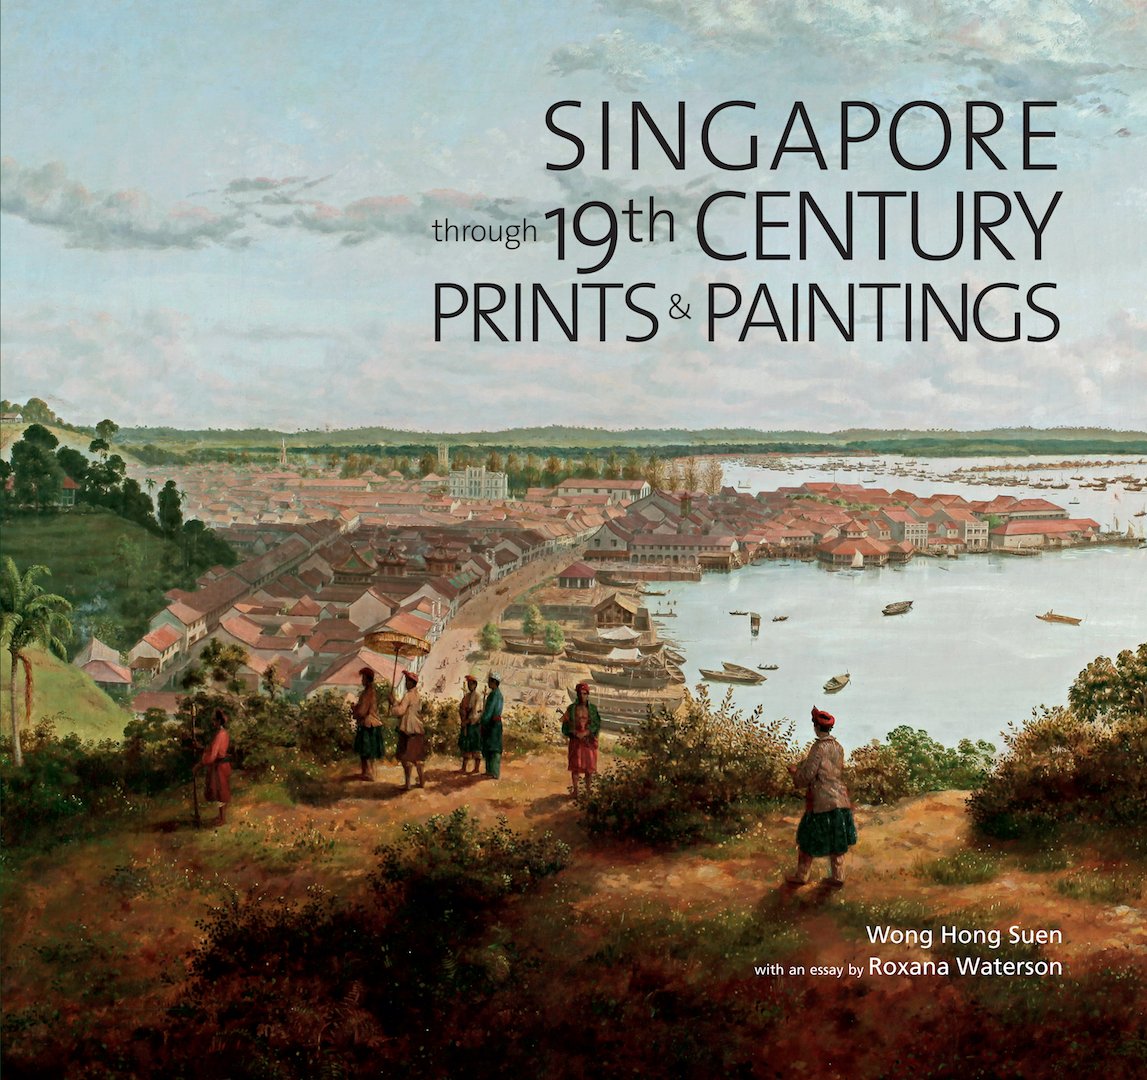 Singapore through 19th Century Prints and Paintings